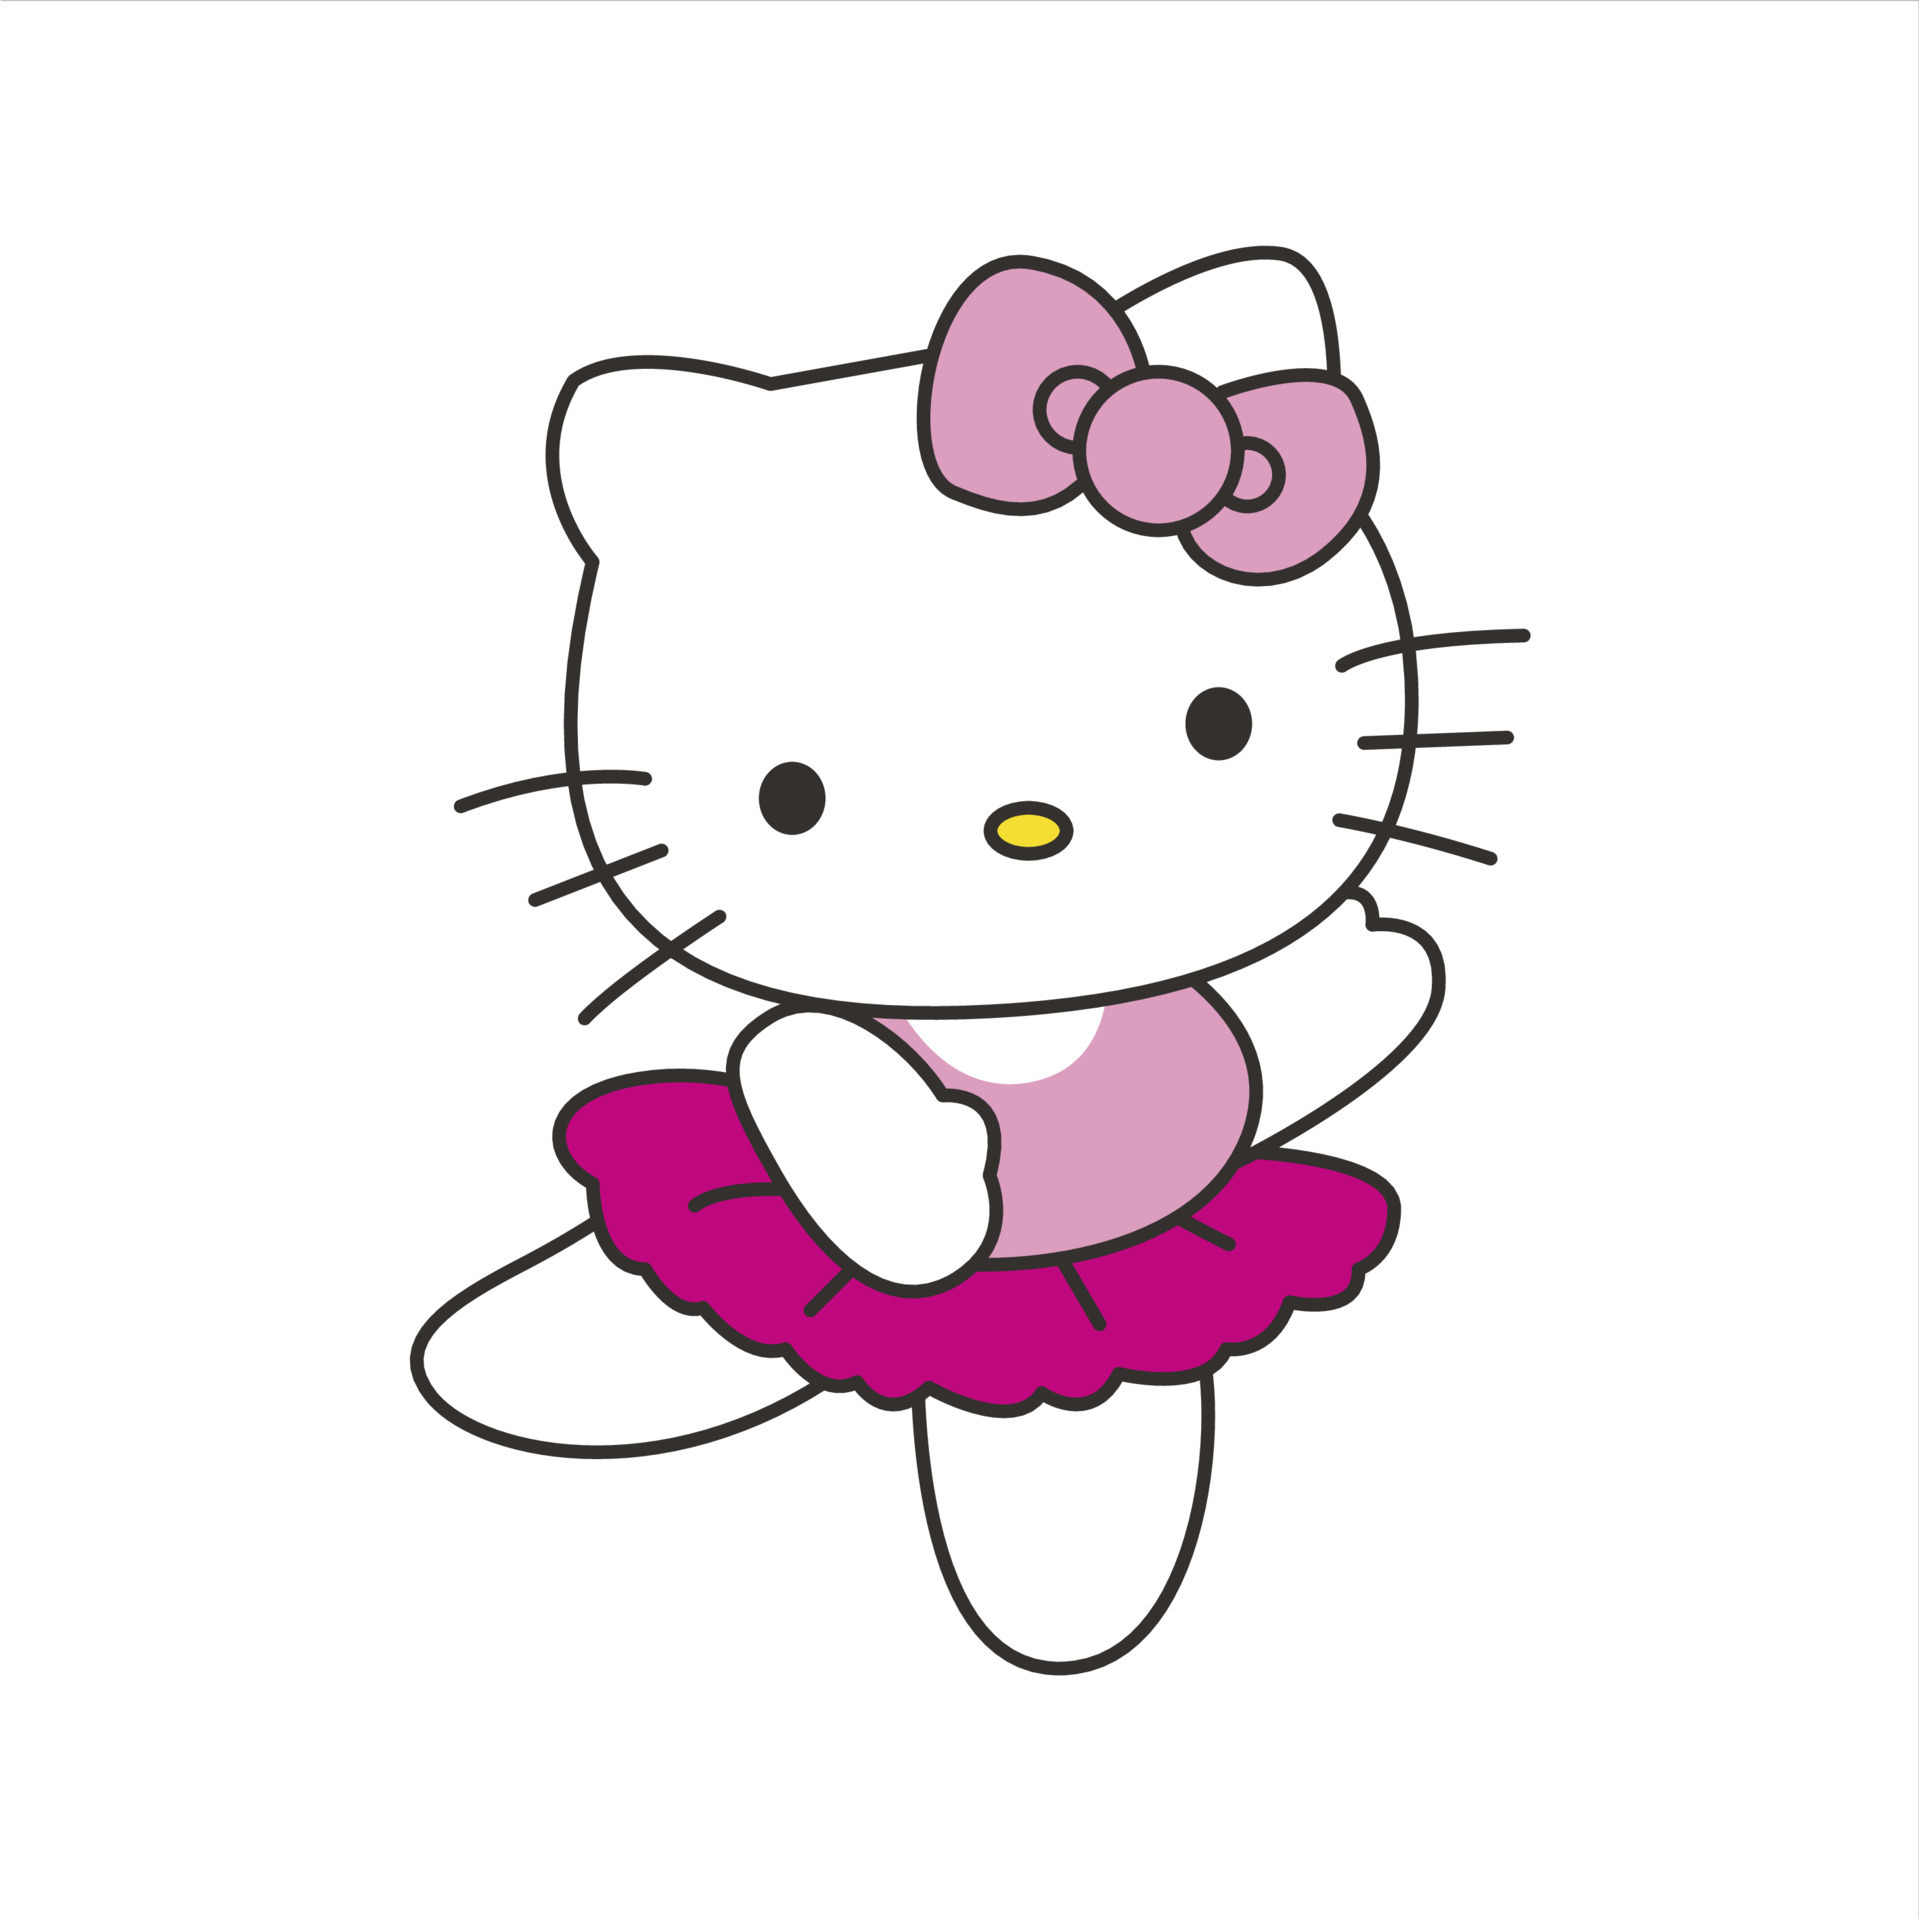 hello kitty with cute pose 22788405 Vector Art at Vecteezy